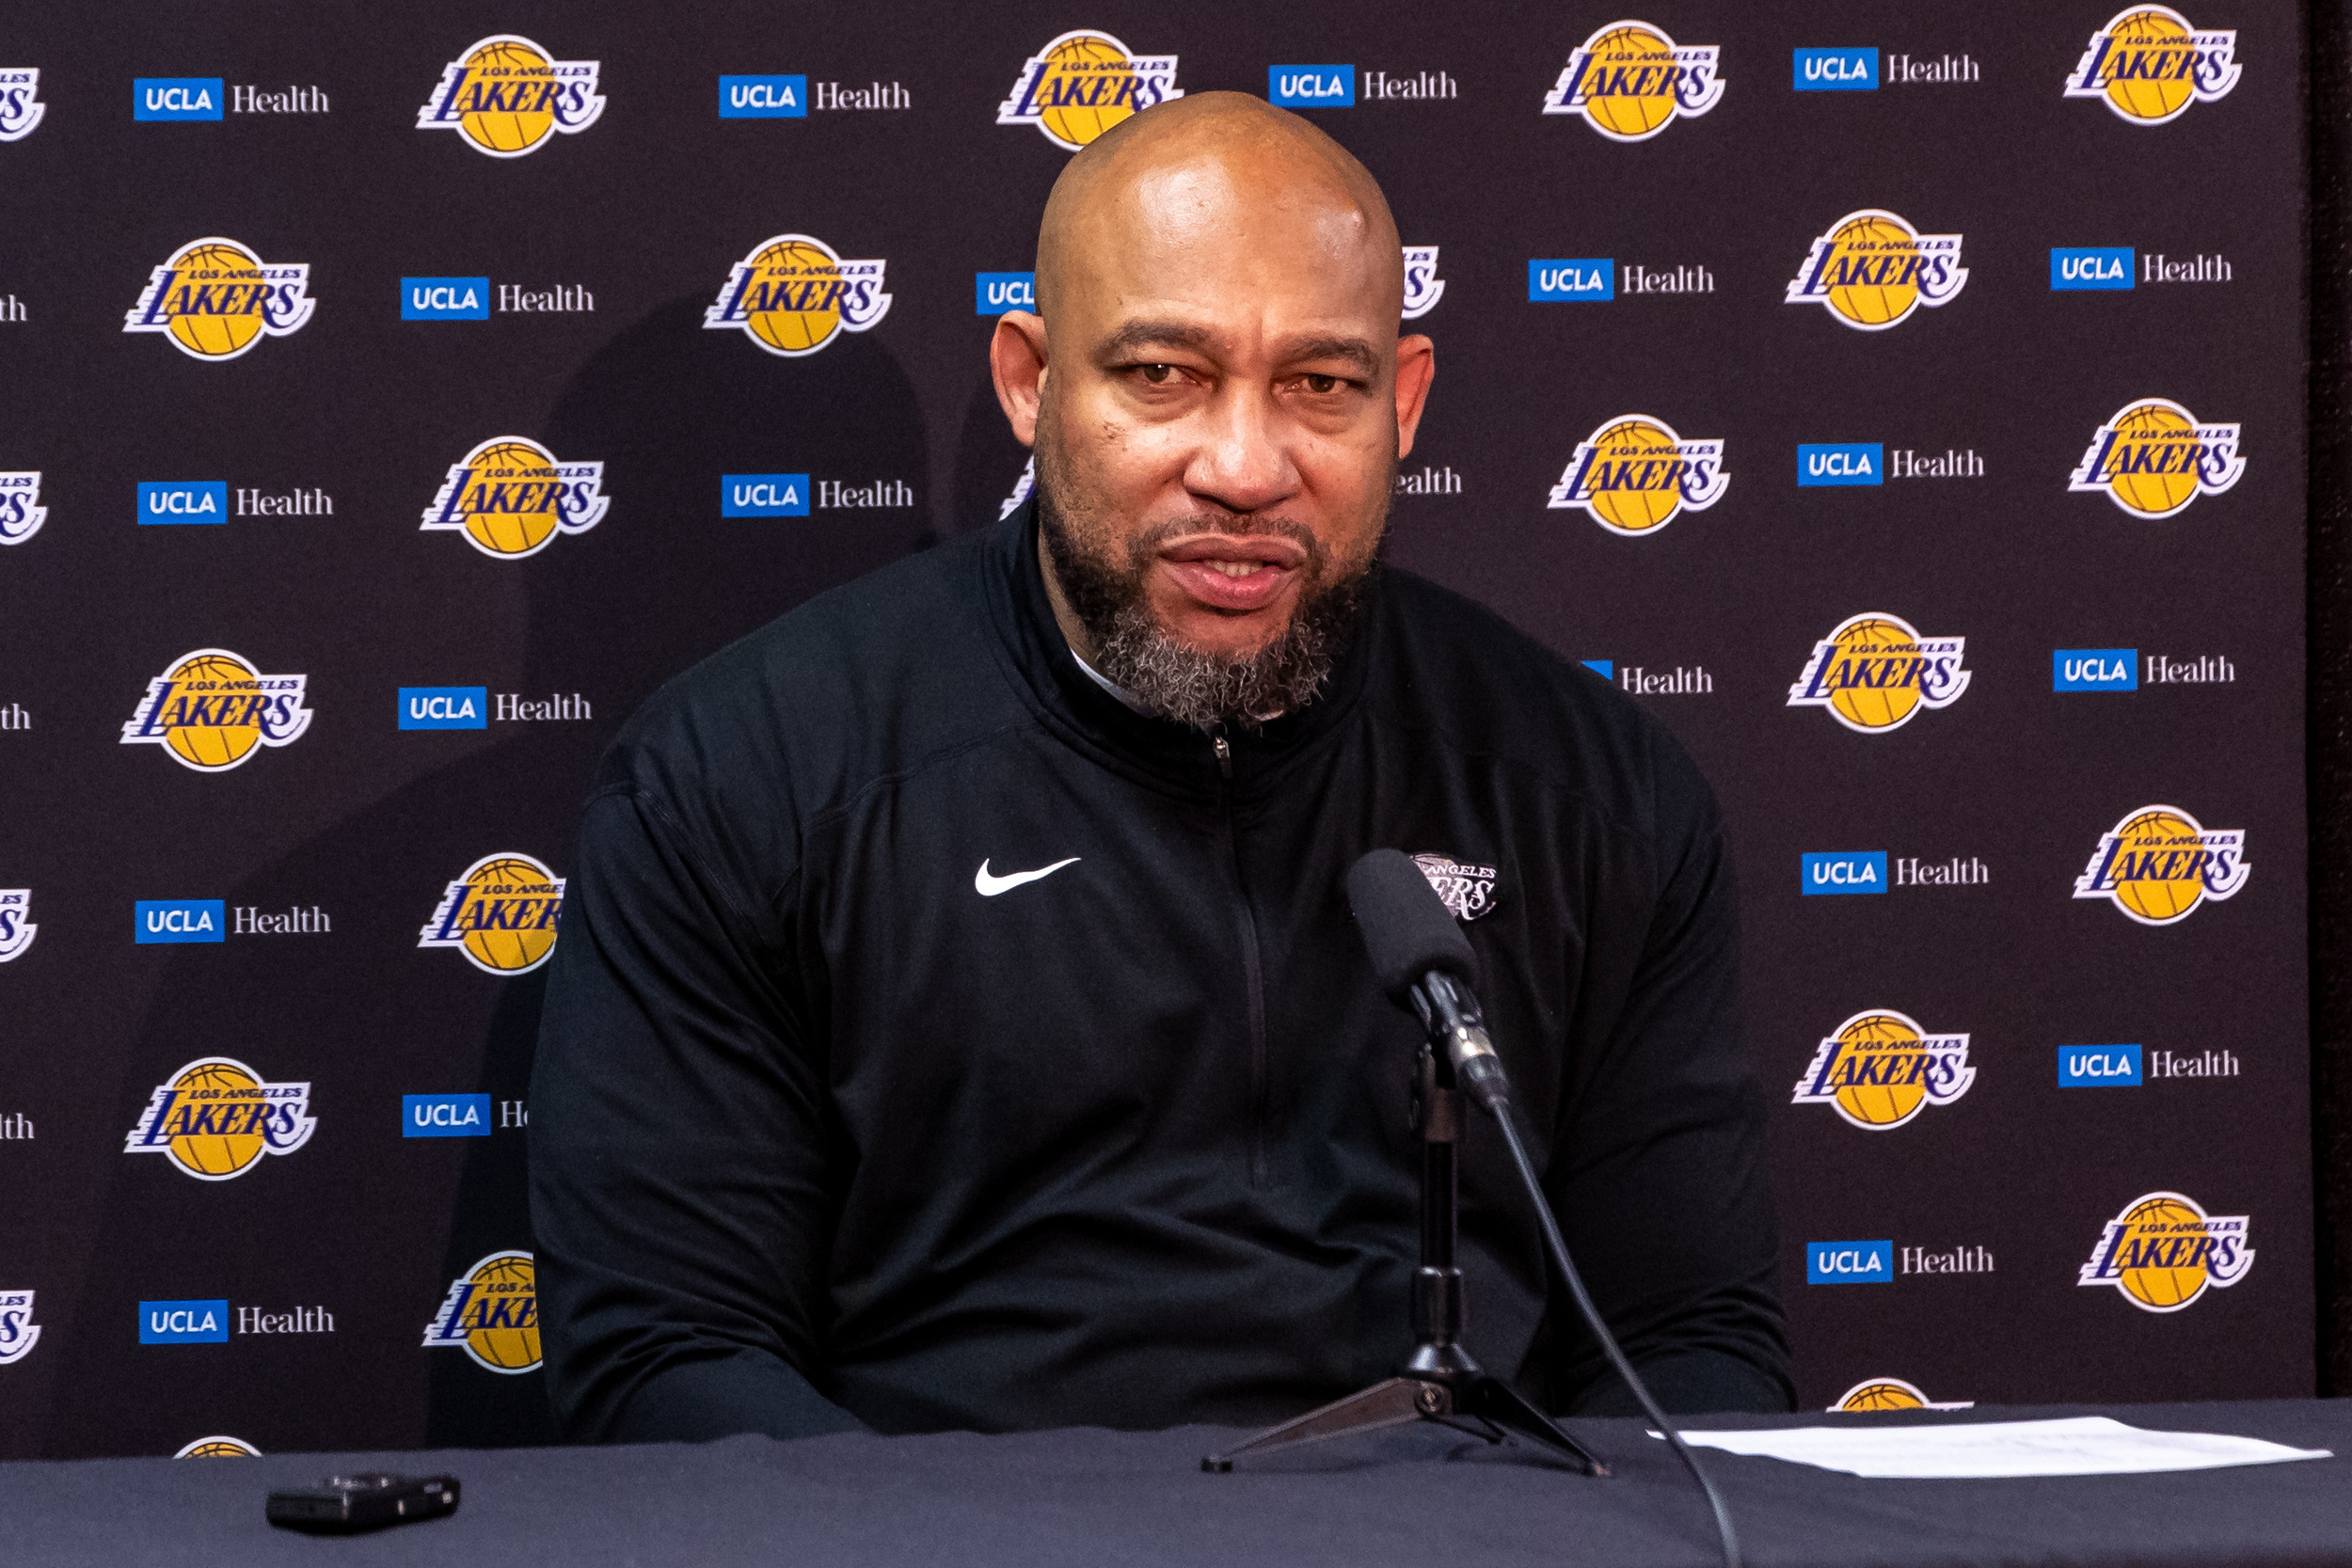 charles barkley defends darvin ham: 'lakers suck because of the players'